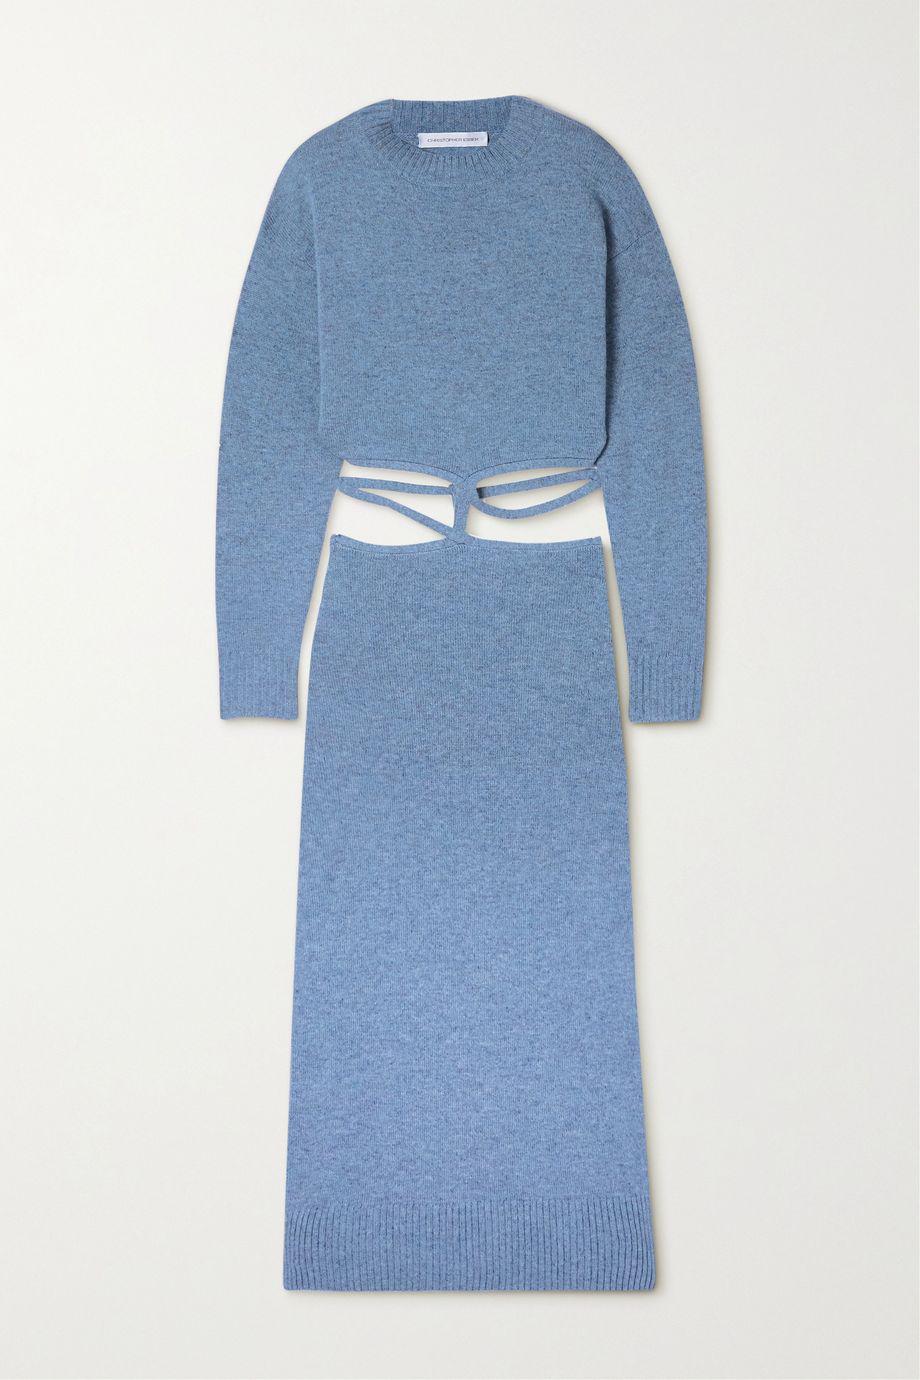 Tie-detailed cutout wool and cashmere-blend midi dress by CHRISTOPHER ESBER